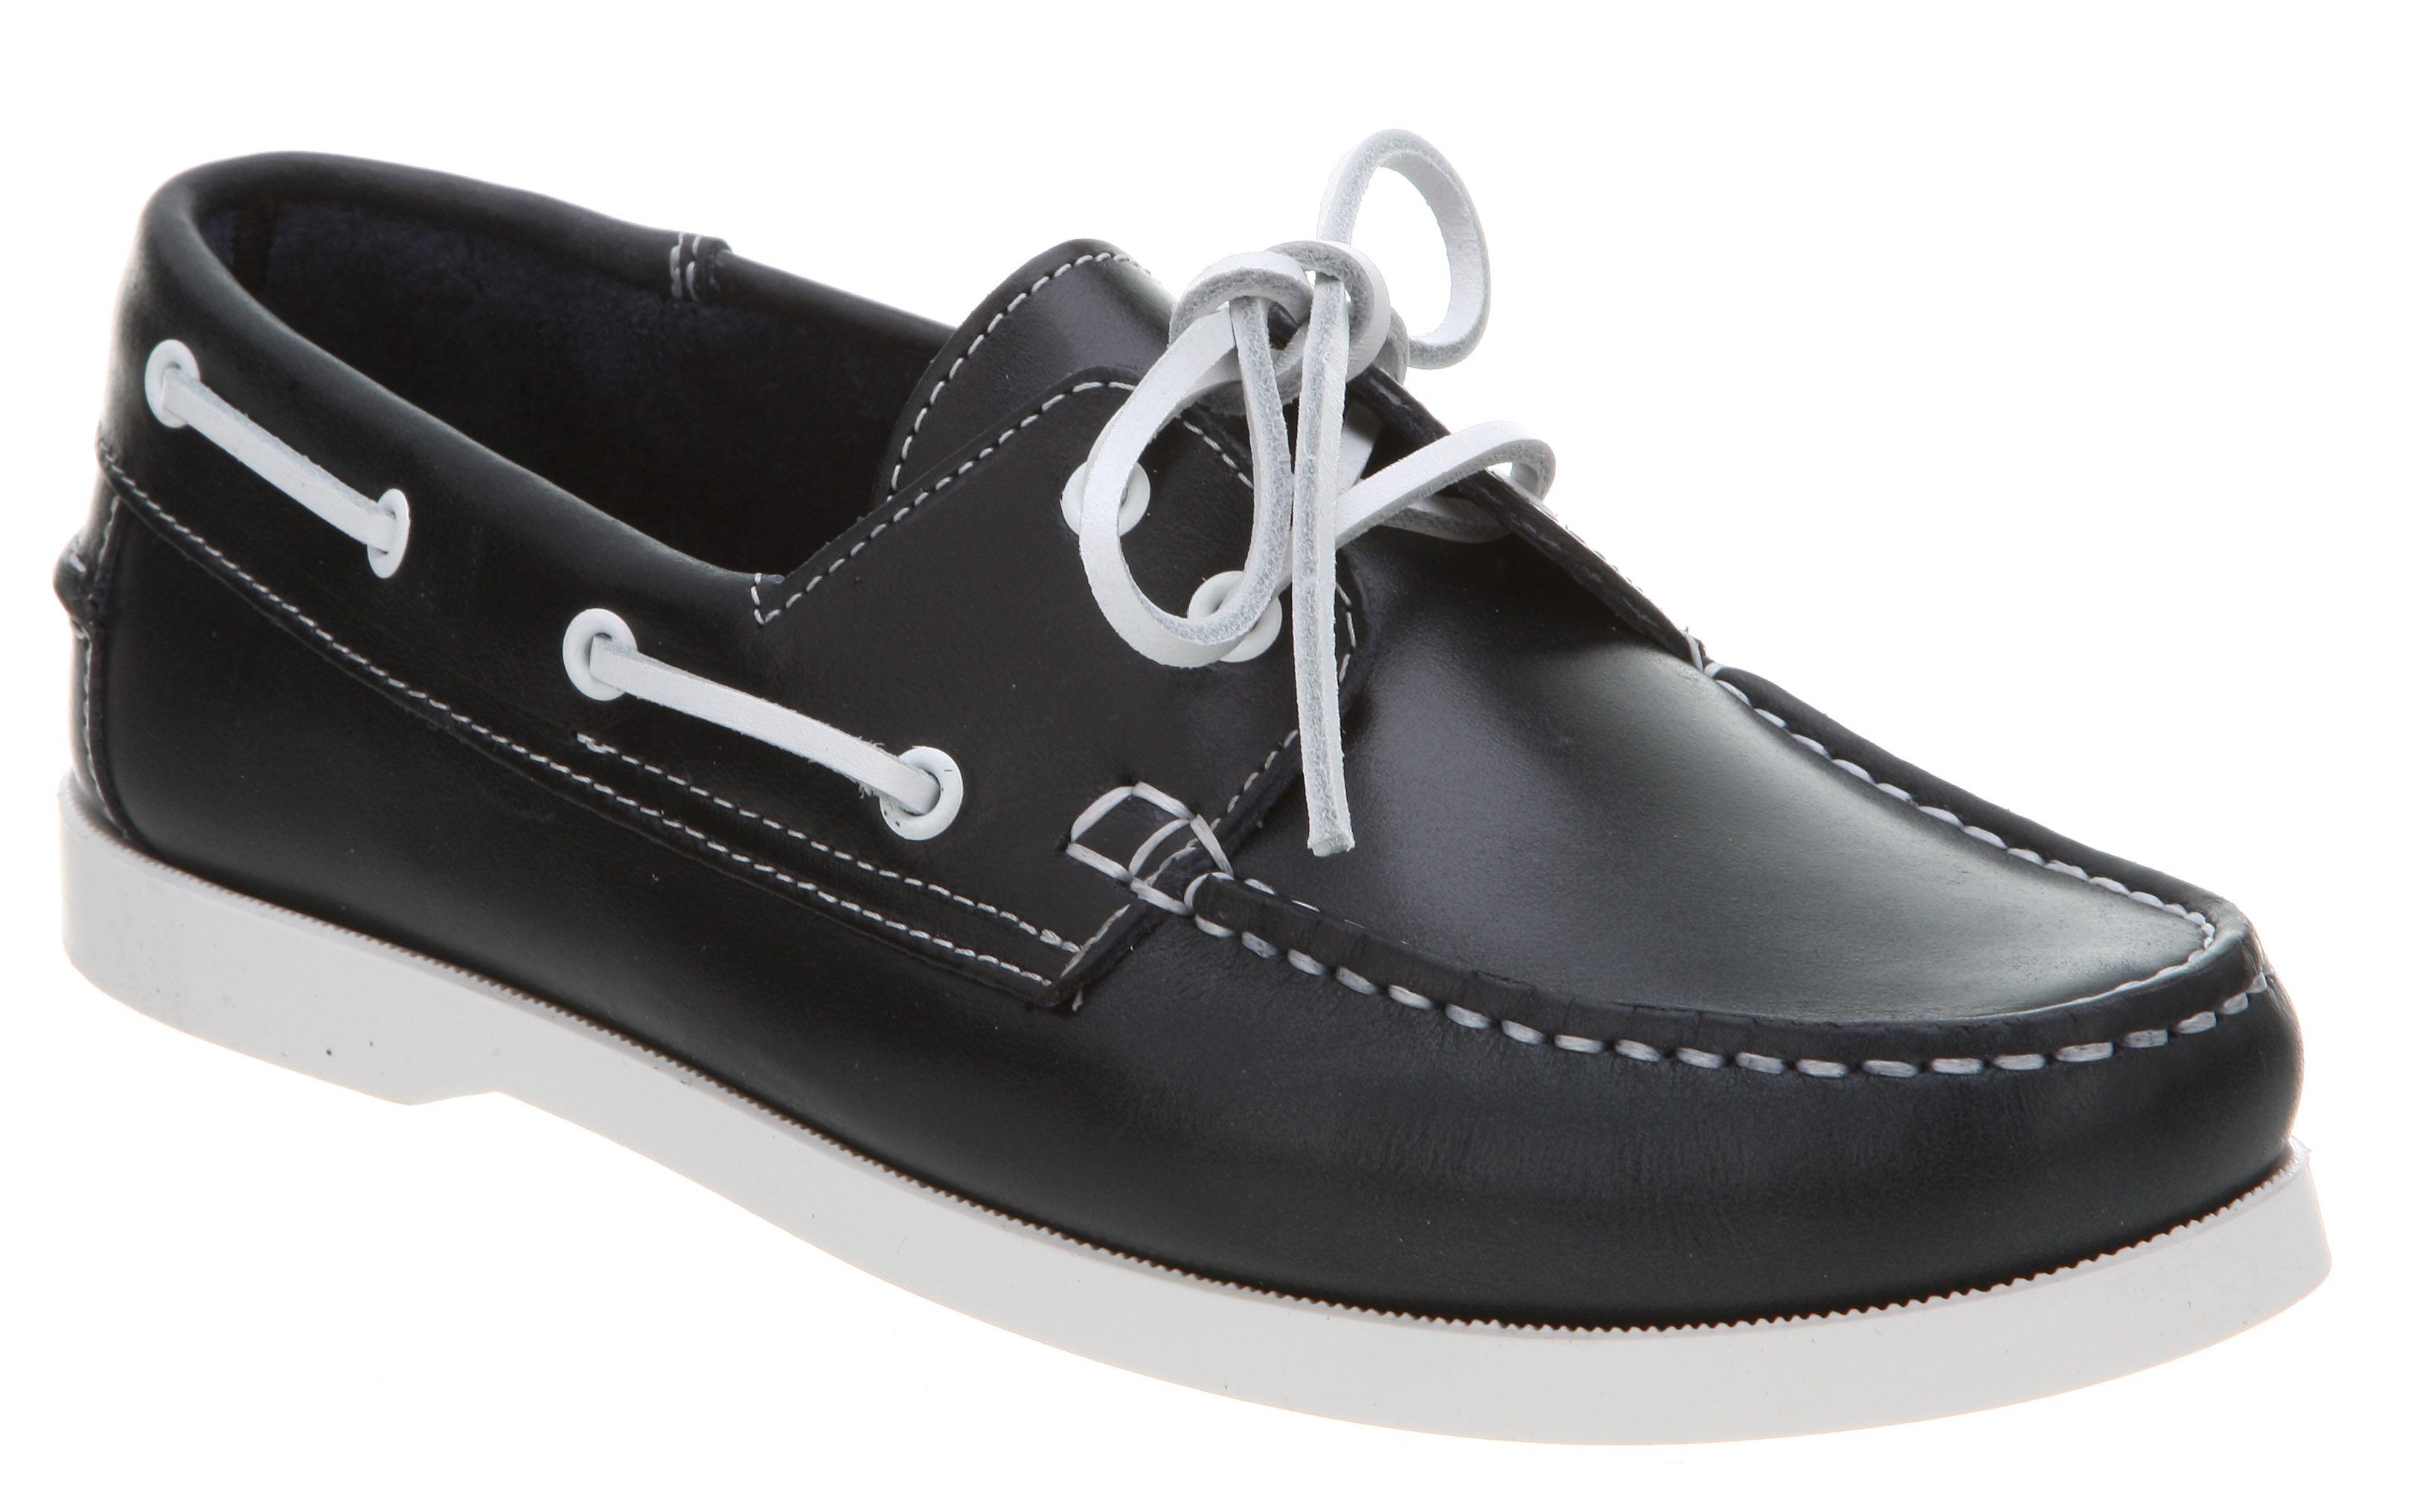 navy leather boat shoes